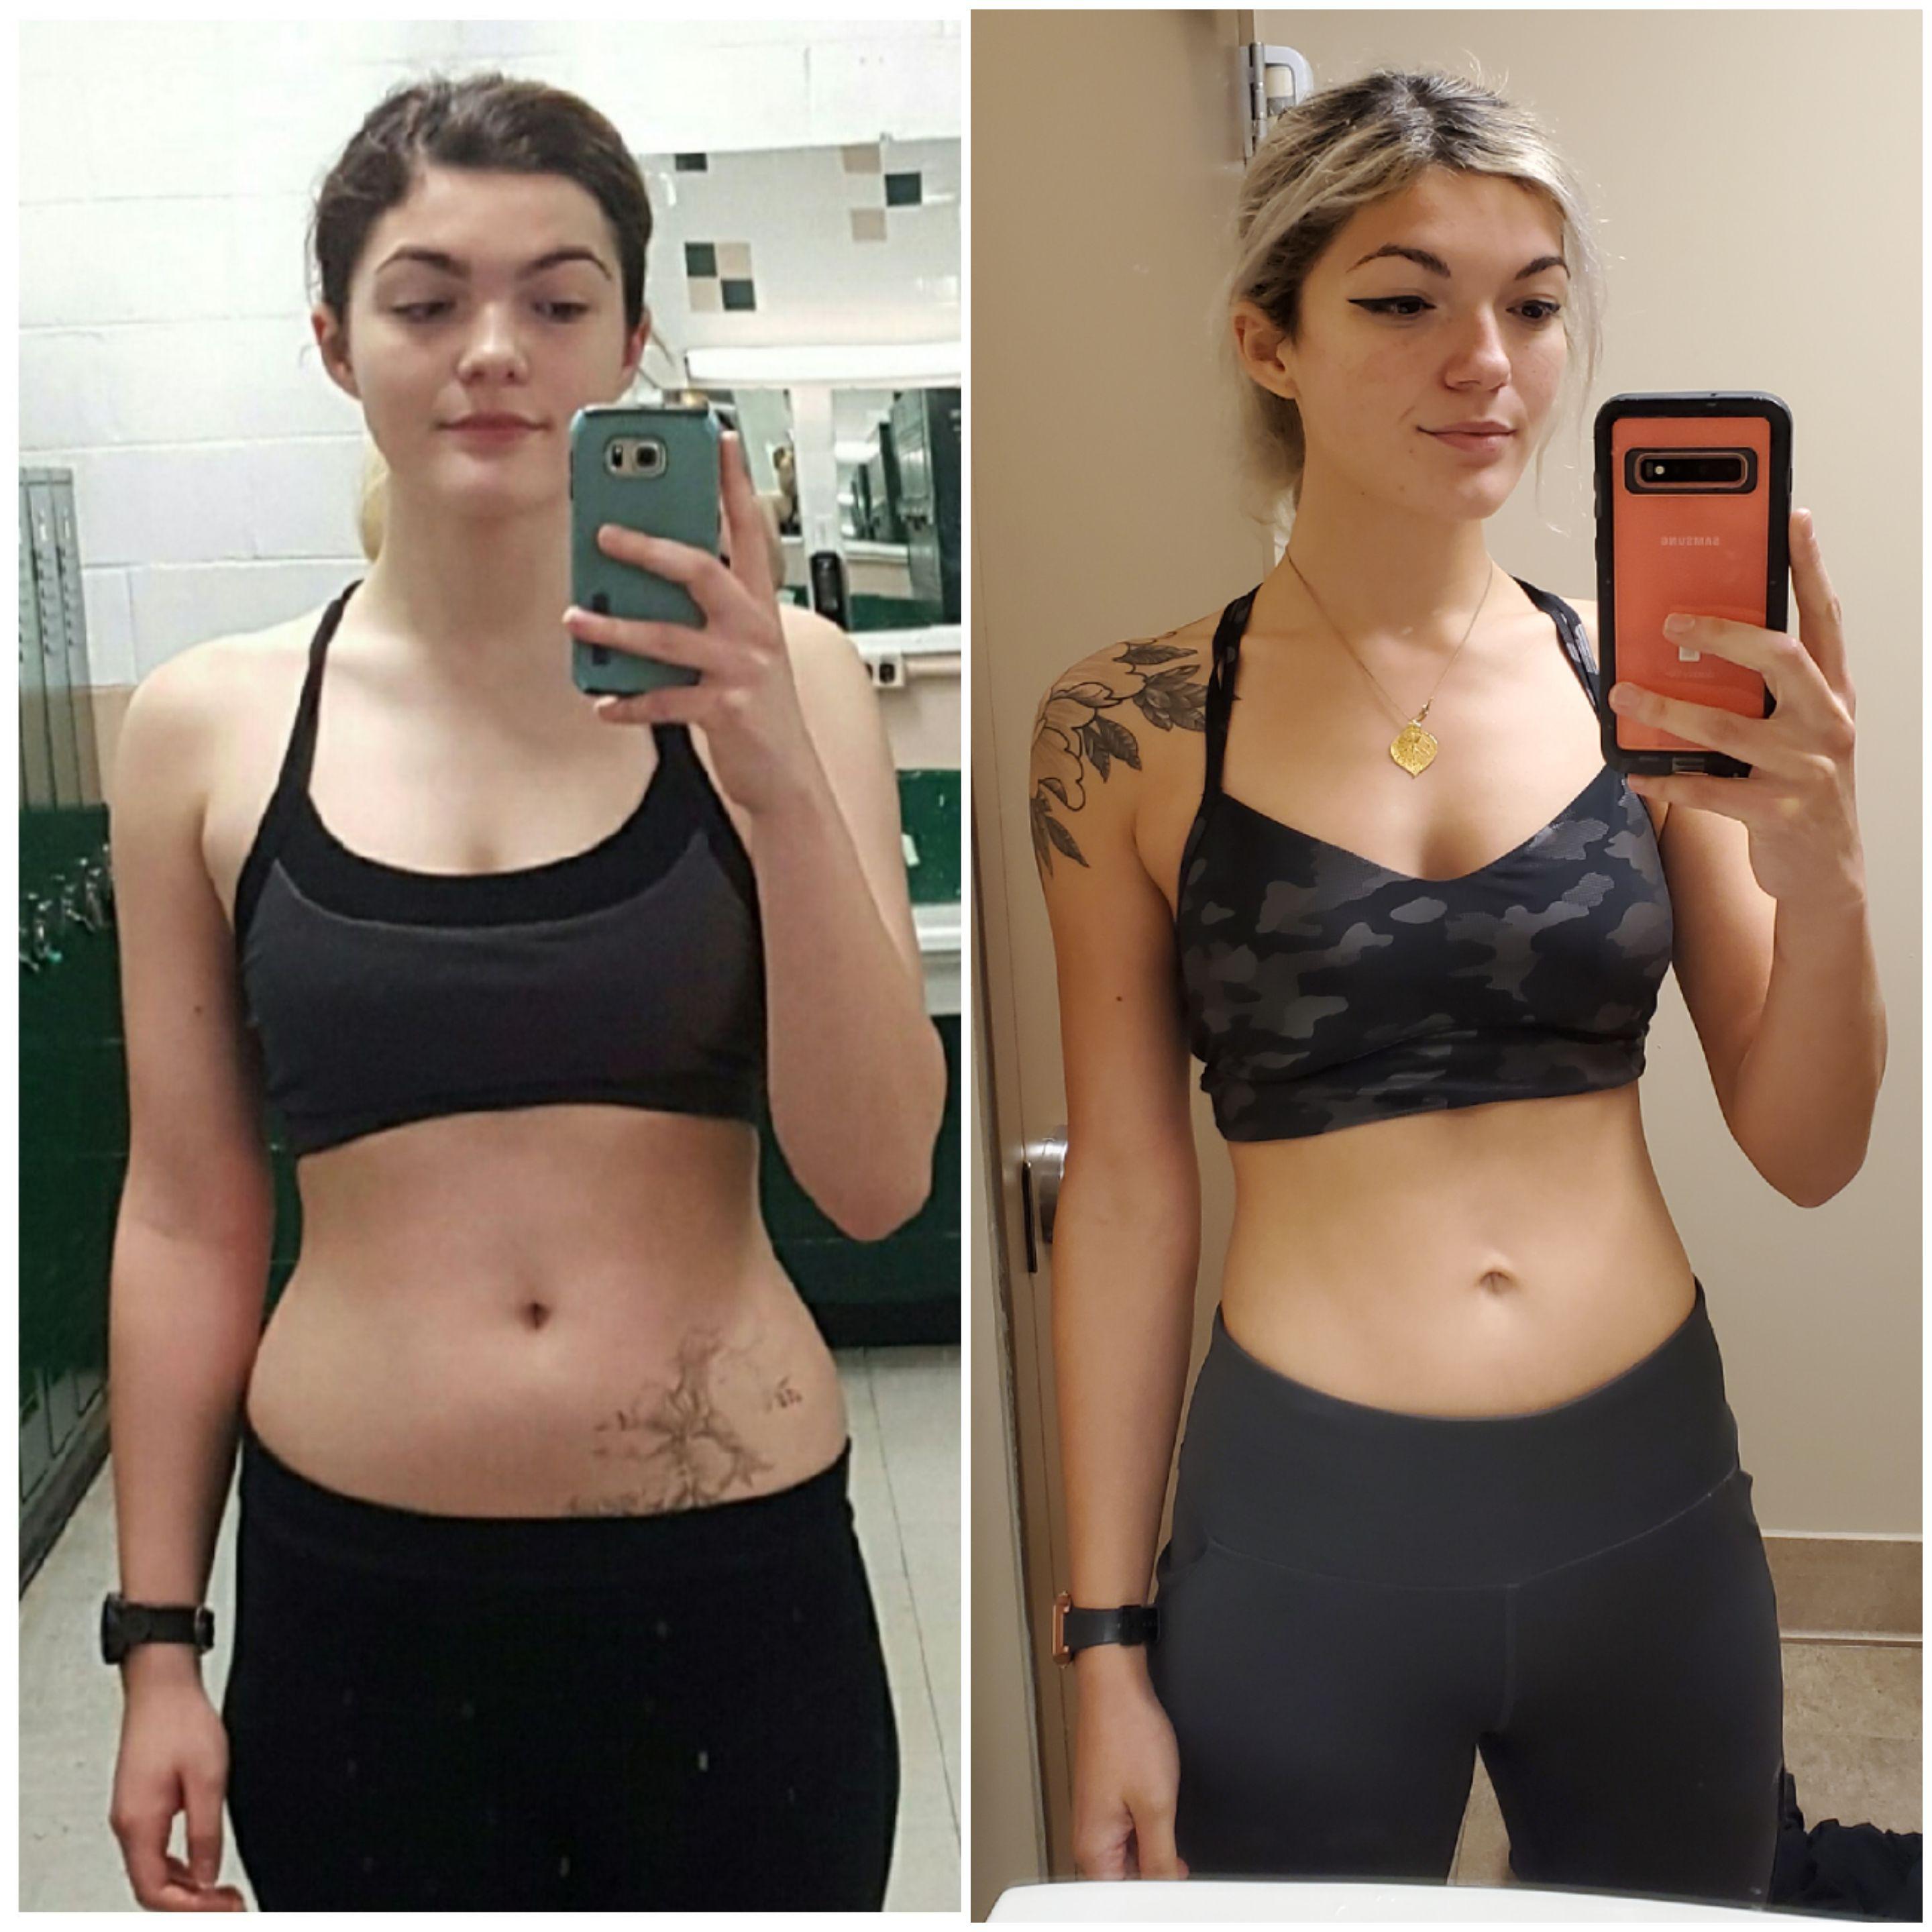 5 feet 11 Female 20 lbs Weight Loss Before and After 170 lbs to 150 lbs. 